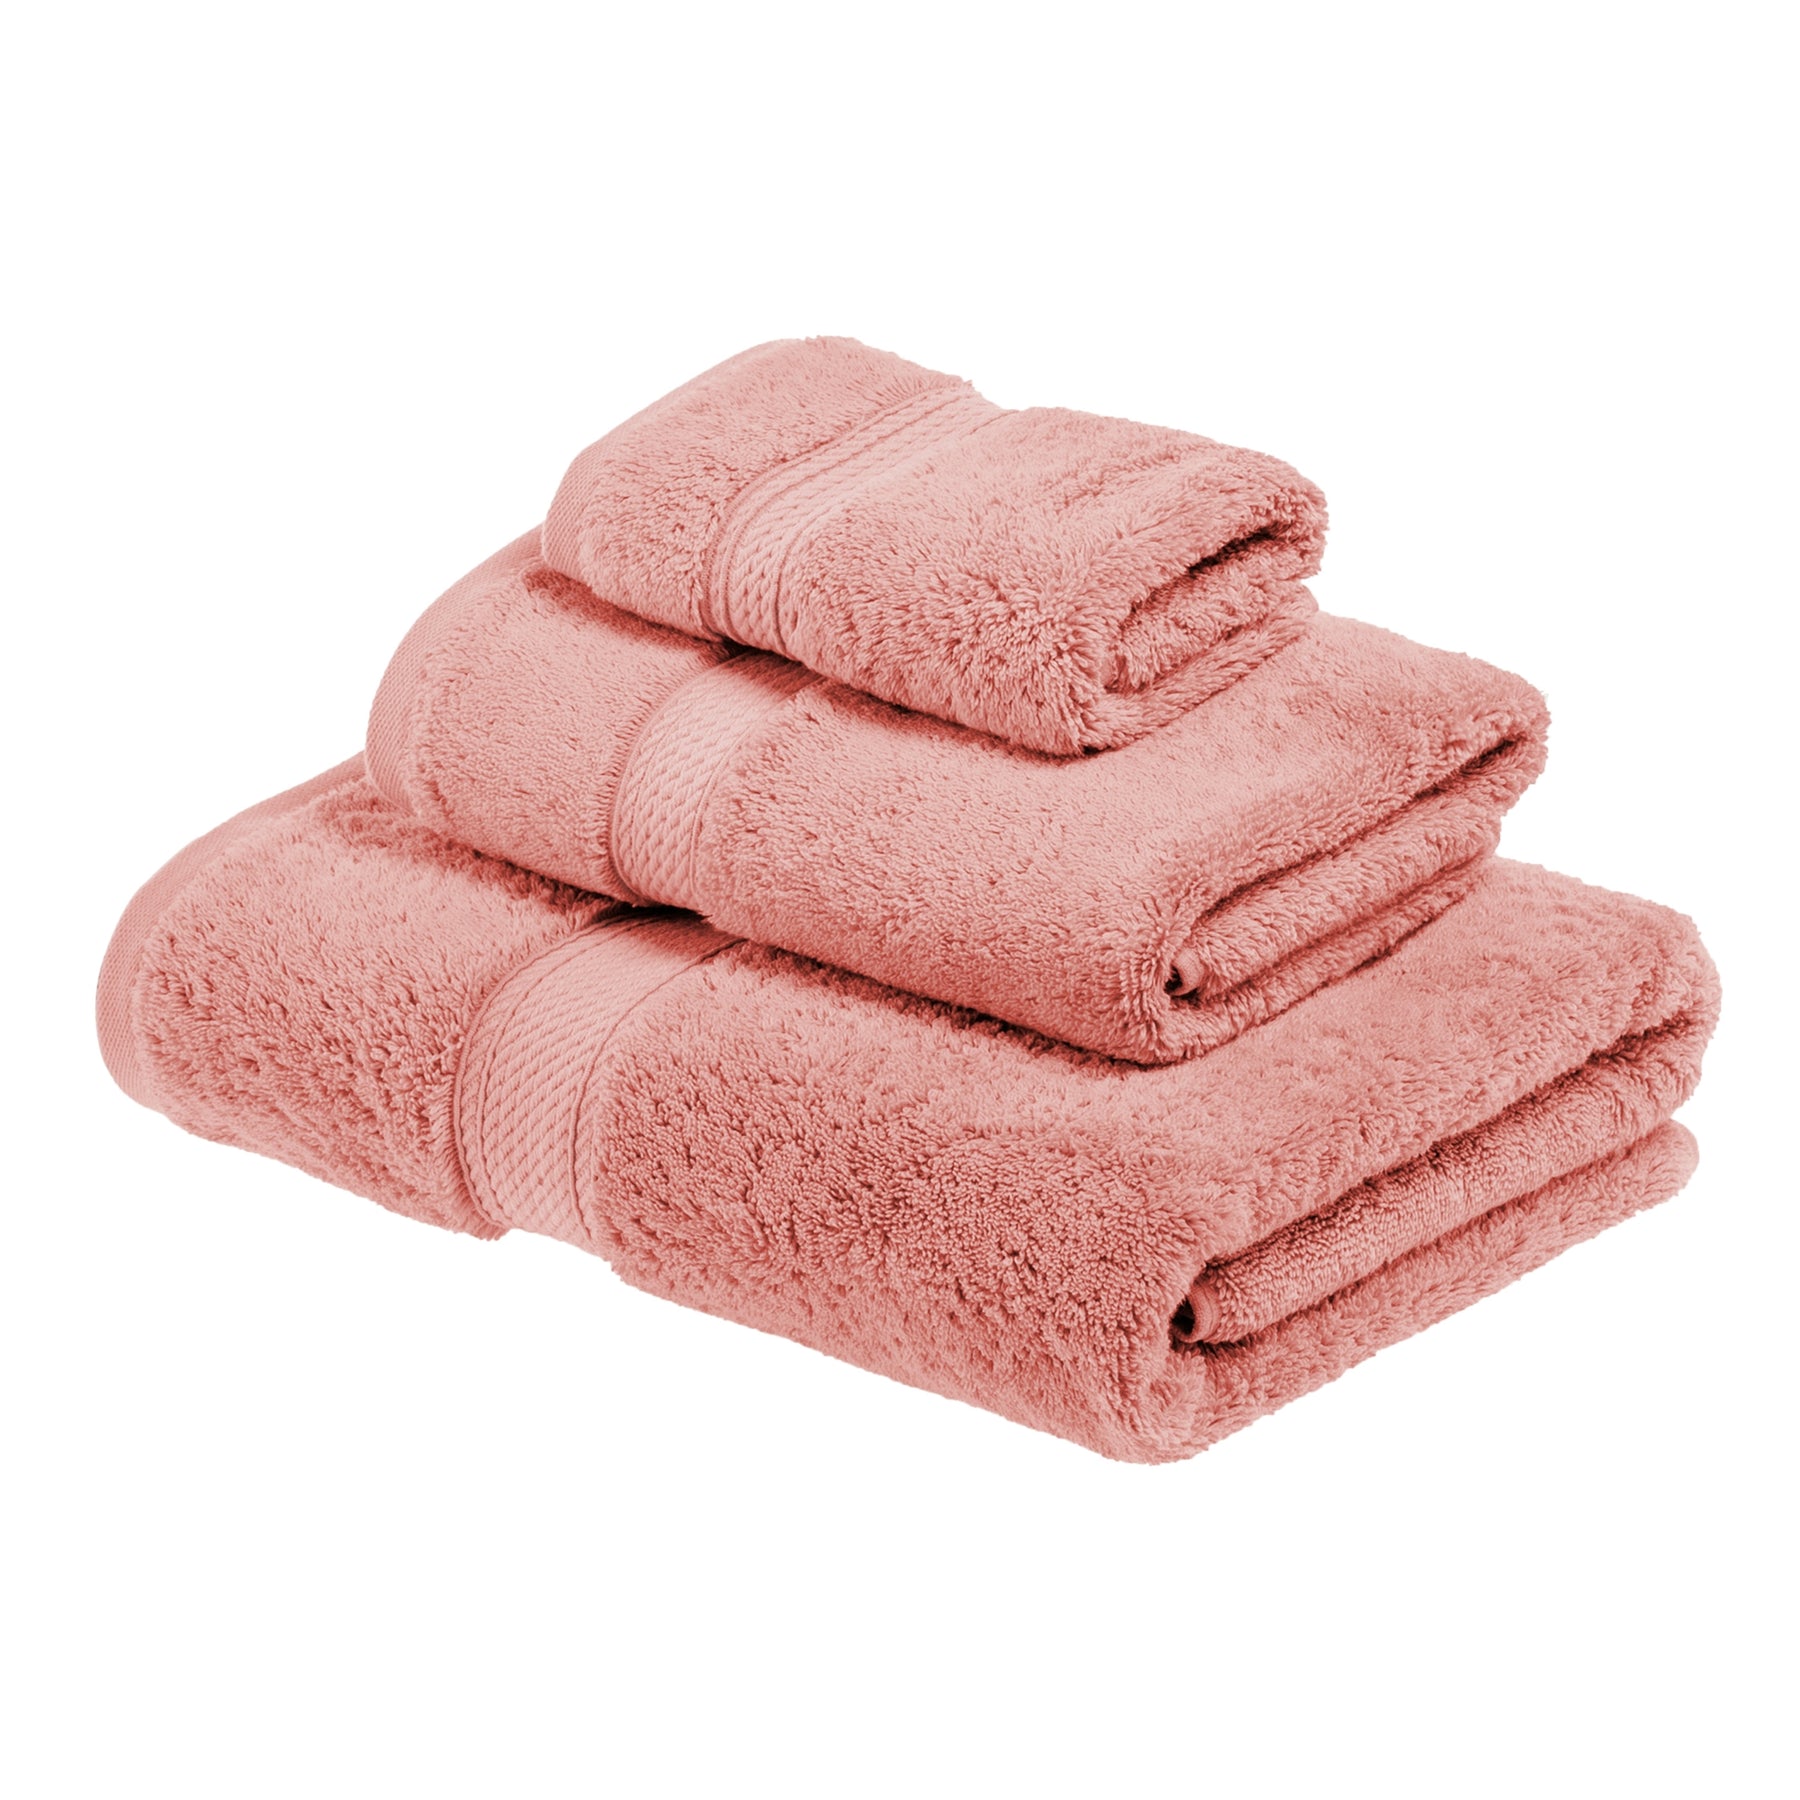 Thick Dusty Pink Bath Towels. Egyptian Cotton Bathroom Towels. 